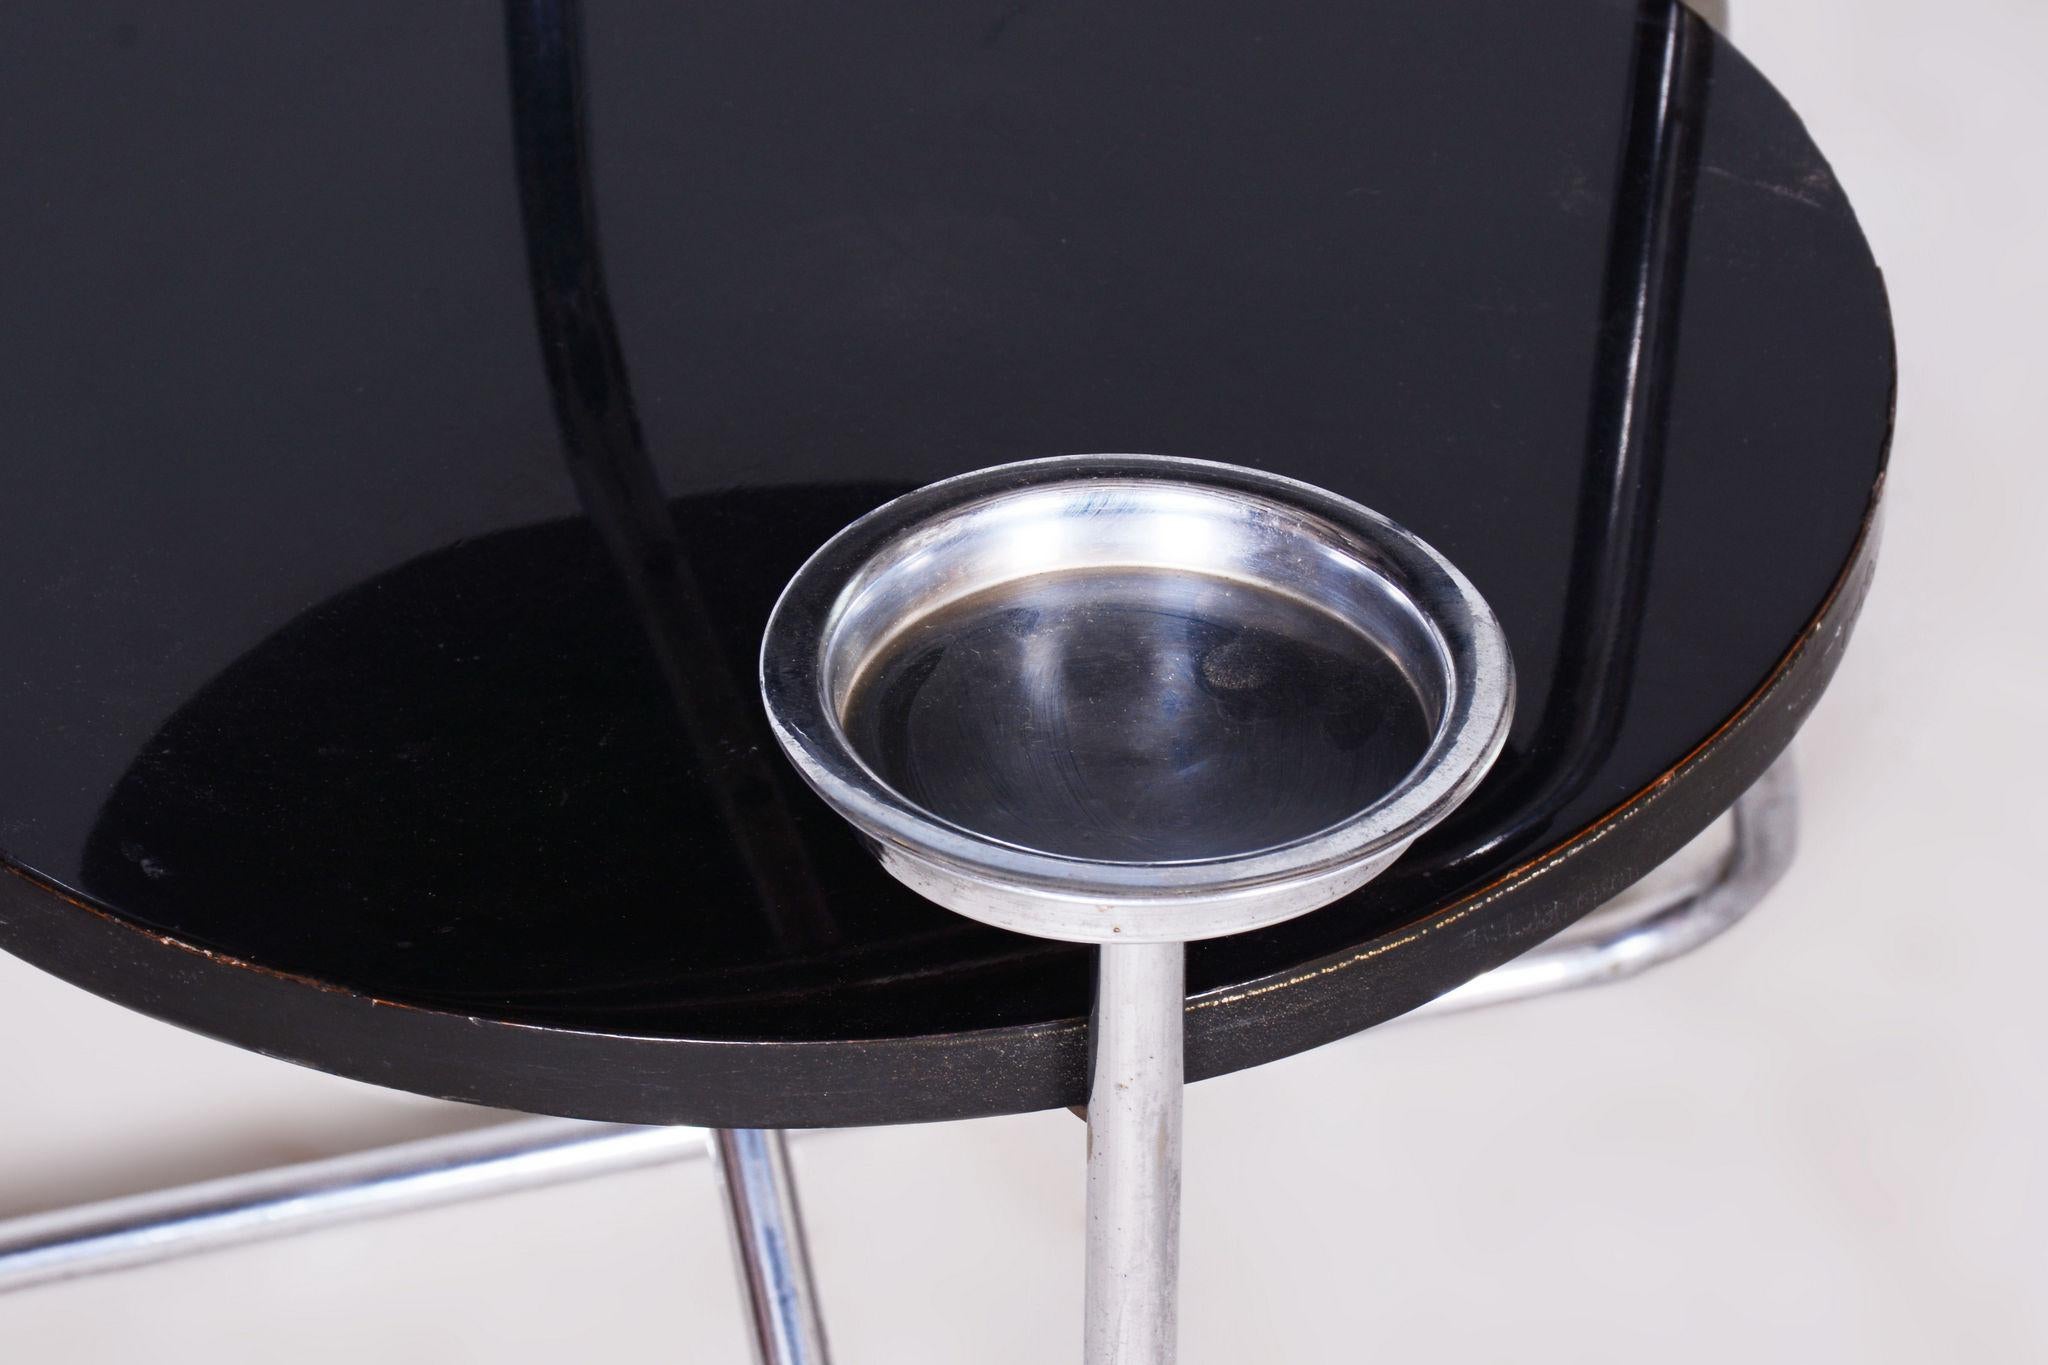 Steel Restored Bauhaus Small Table, Chrome, Revived Polish, Czechia, 1930s For Sale